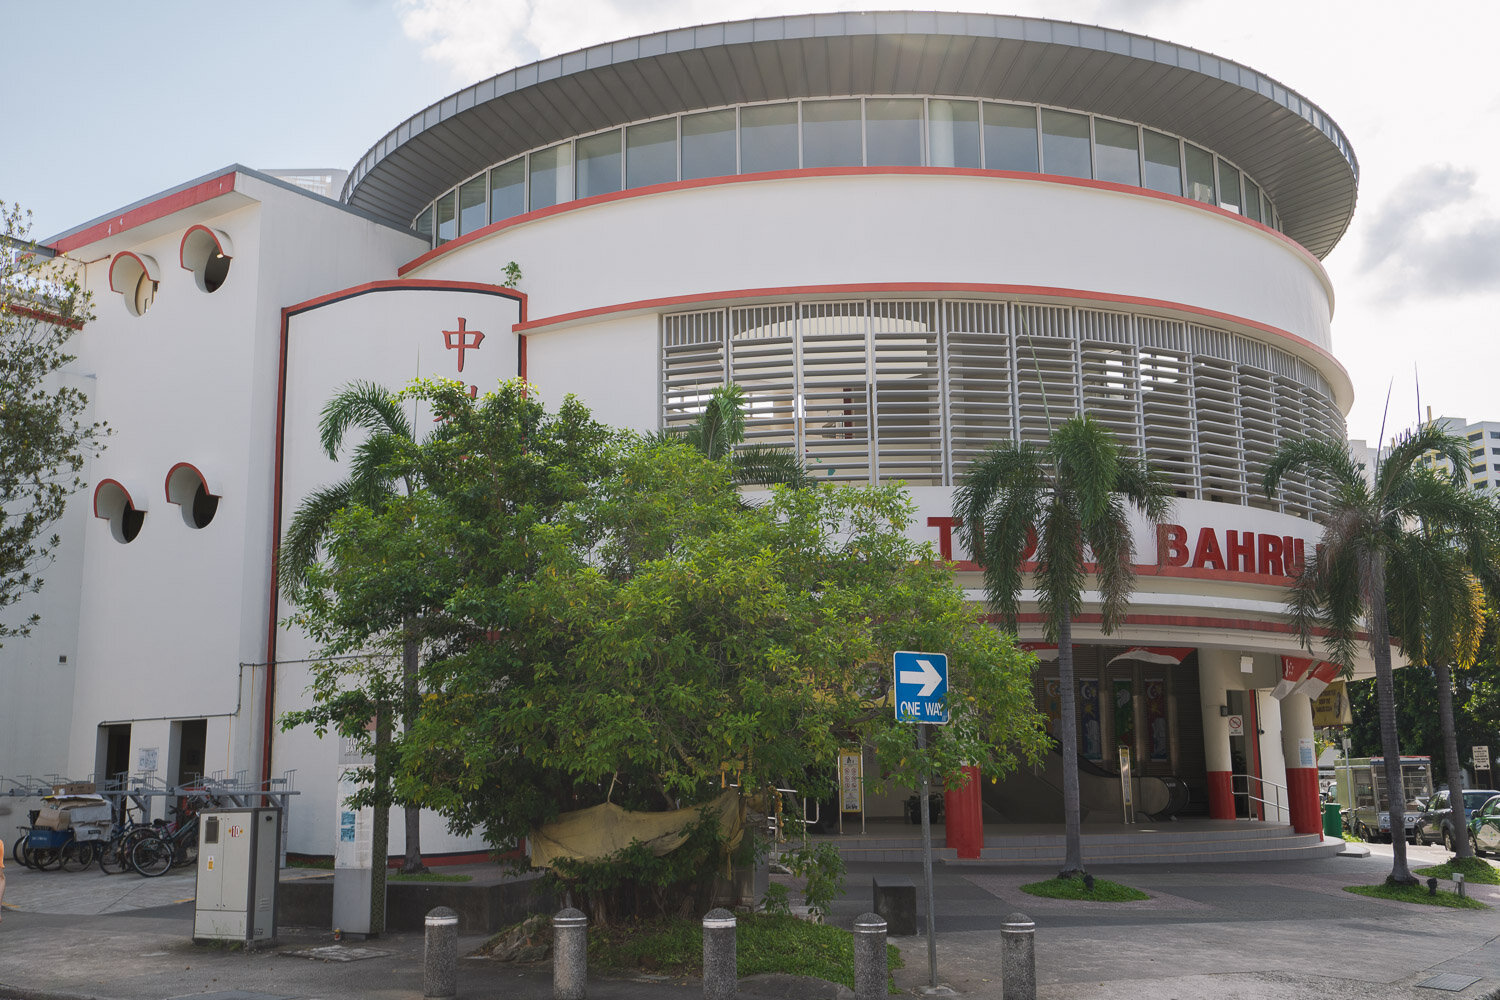 The Tiong Bahru Market has a Hawker Centre, Wet Market and some nice flower shops.